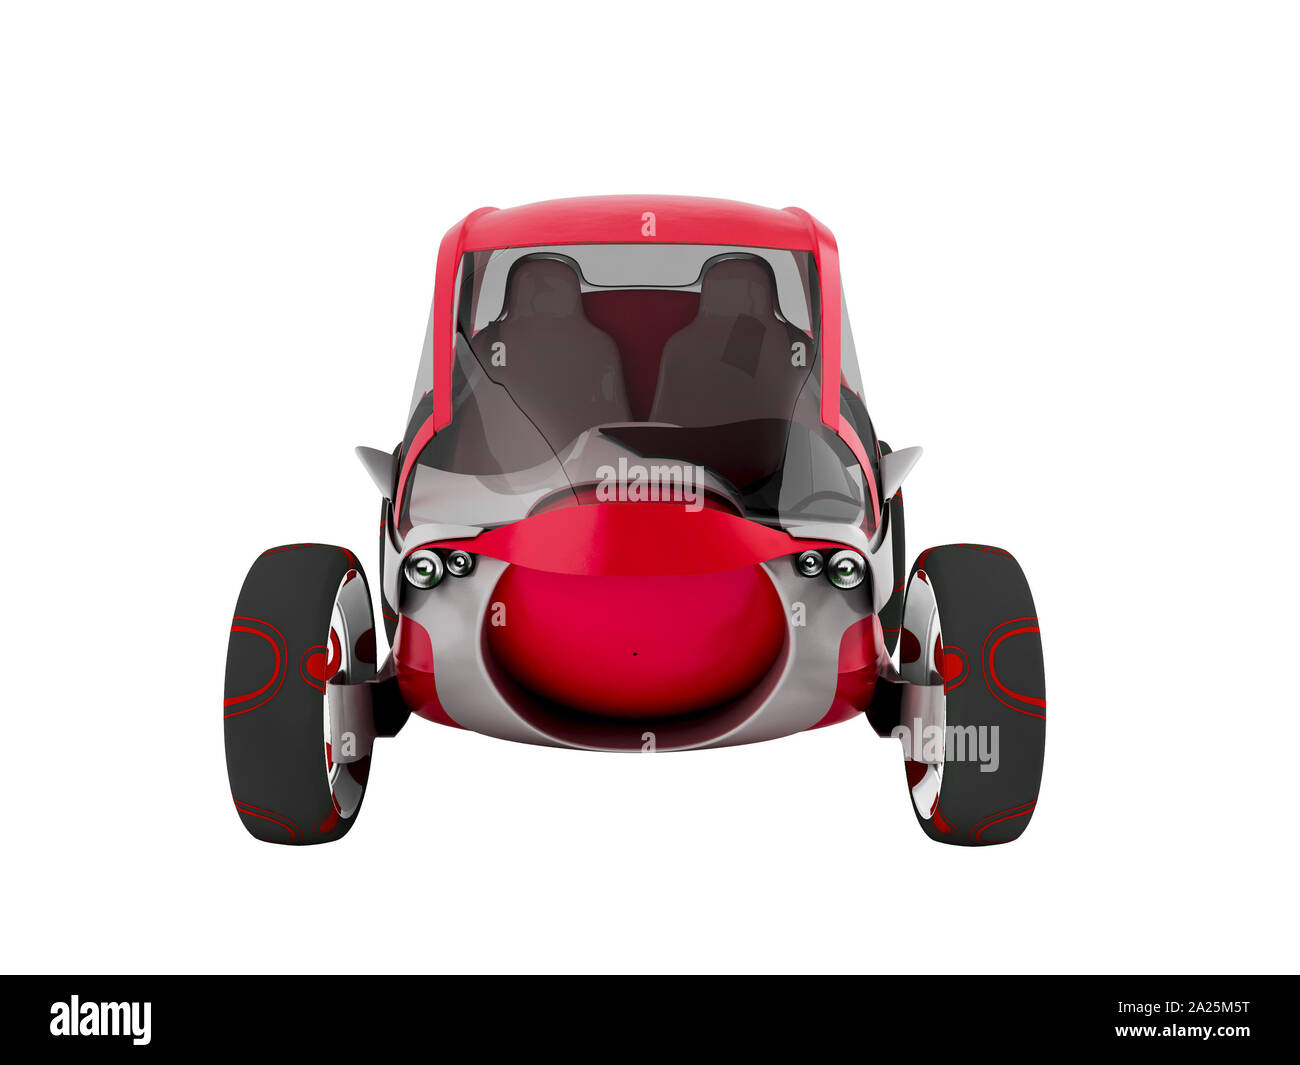 Modern electric car for travel on sidewalks red with gray insets 3D render on white background no shadow Stock Photo